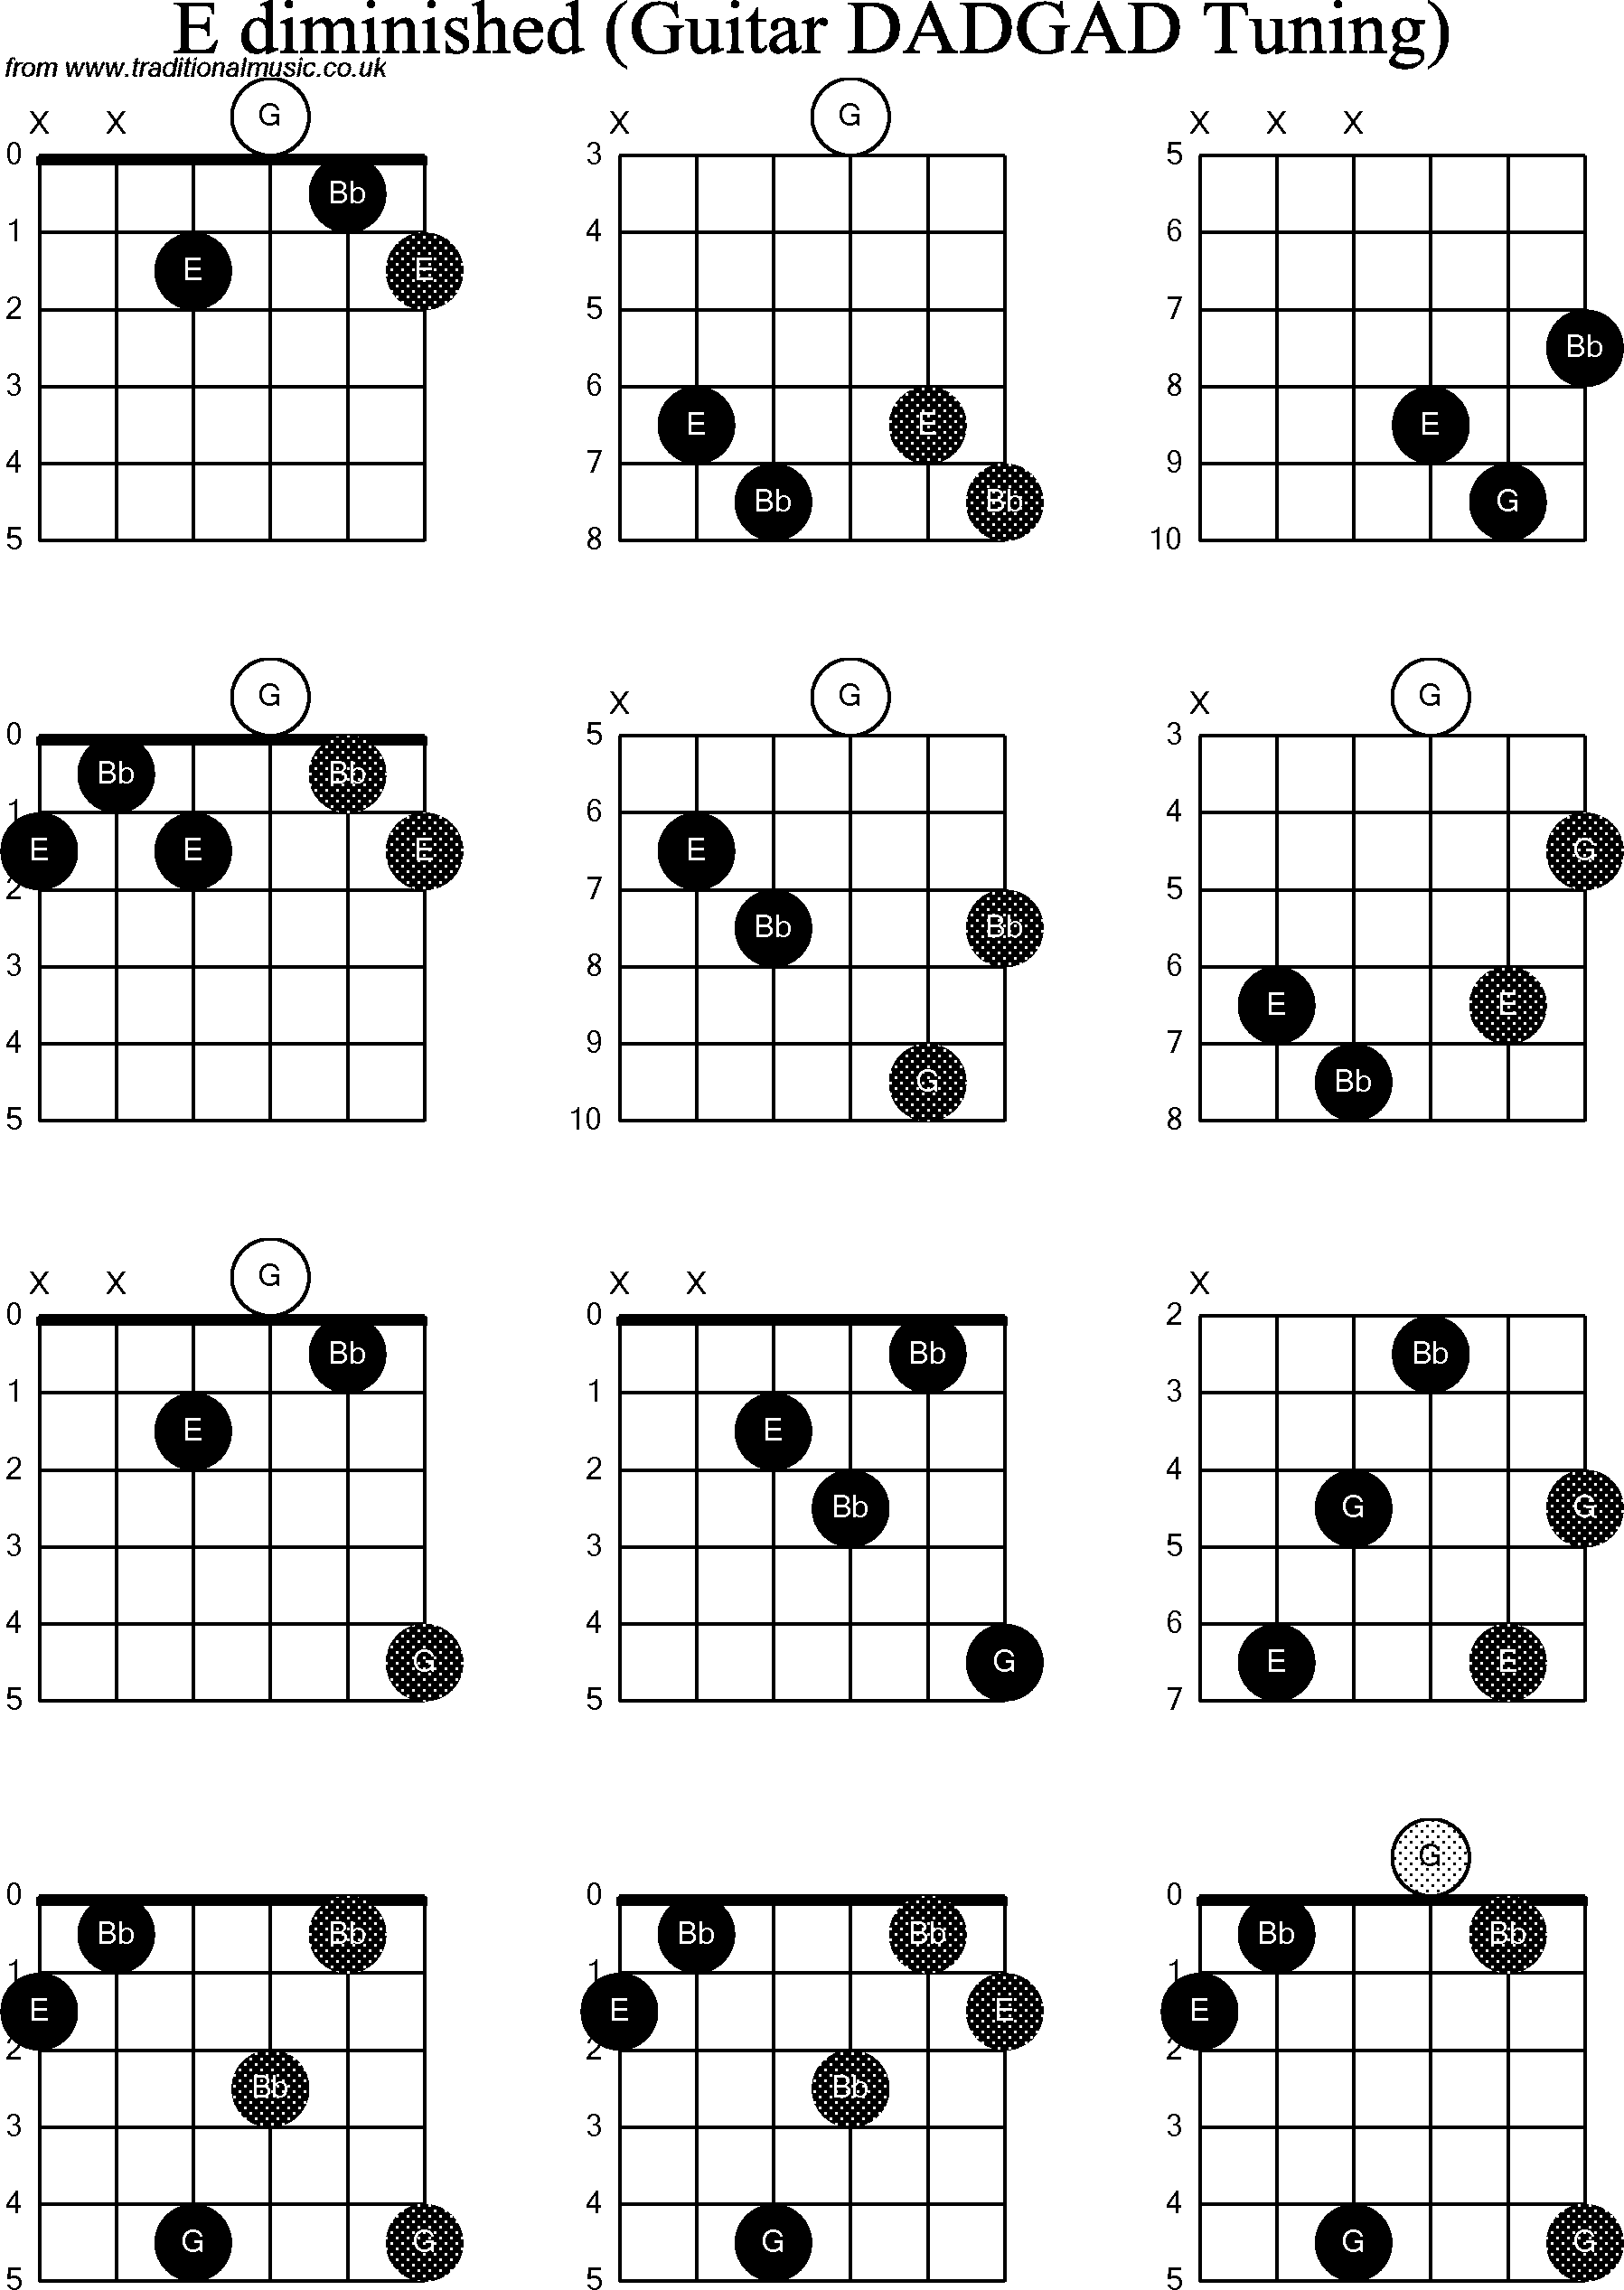 Chord Diagrams for D Modal Guitar(DADGAD), E Diminished